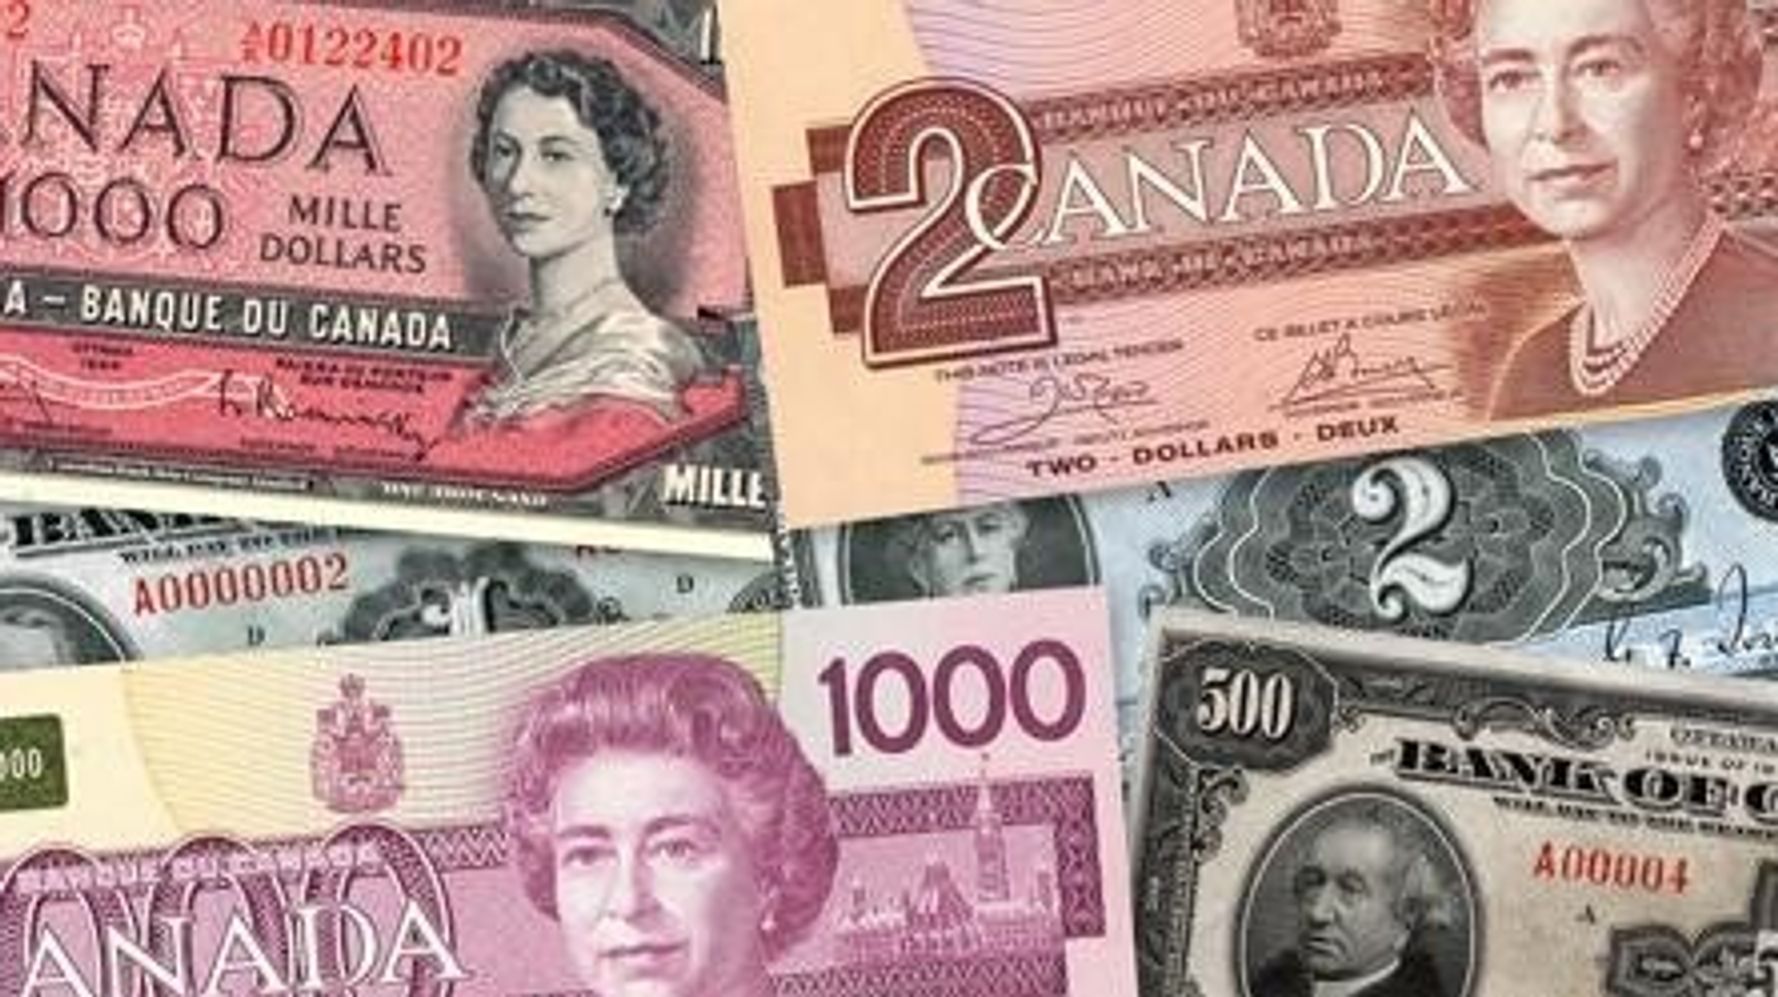 Old Canadian Dollar Bills And 2 Bills To Lose Legal Tender Status In 21 Huffpost Canada Business